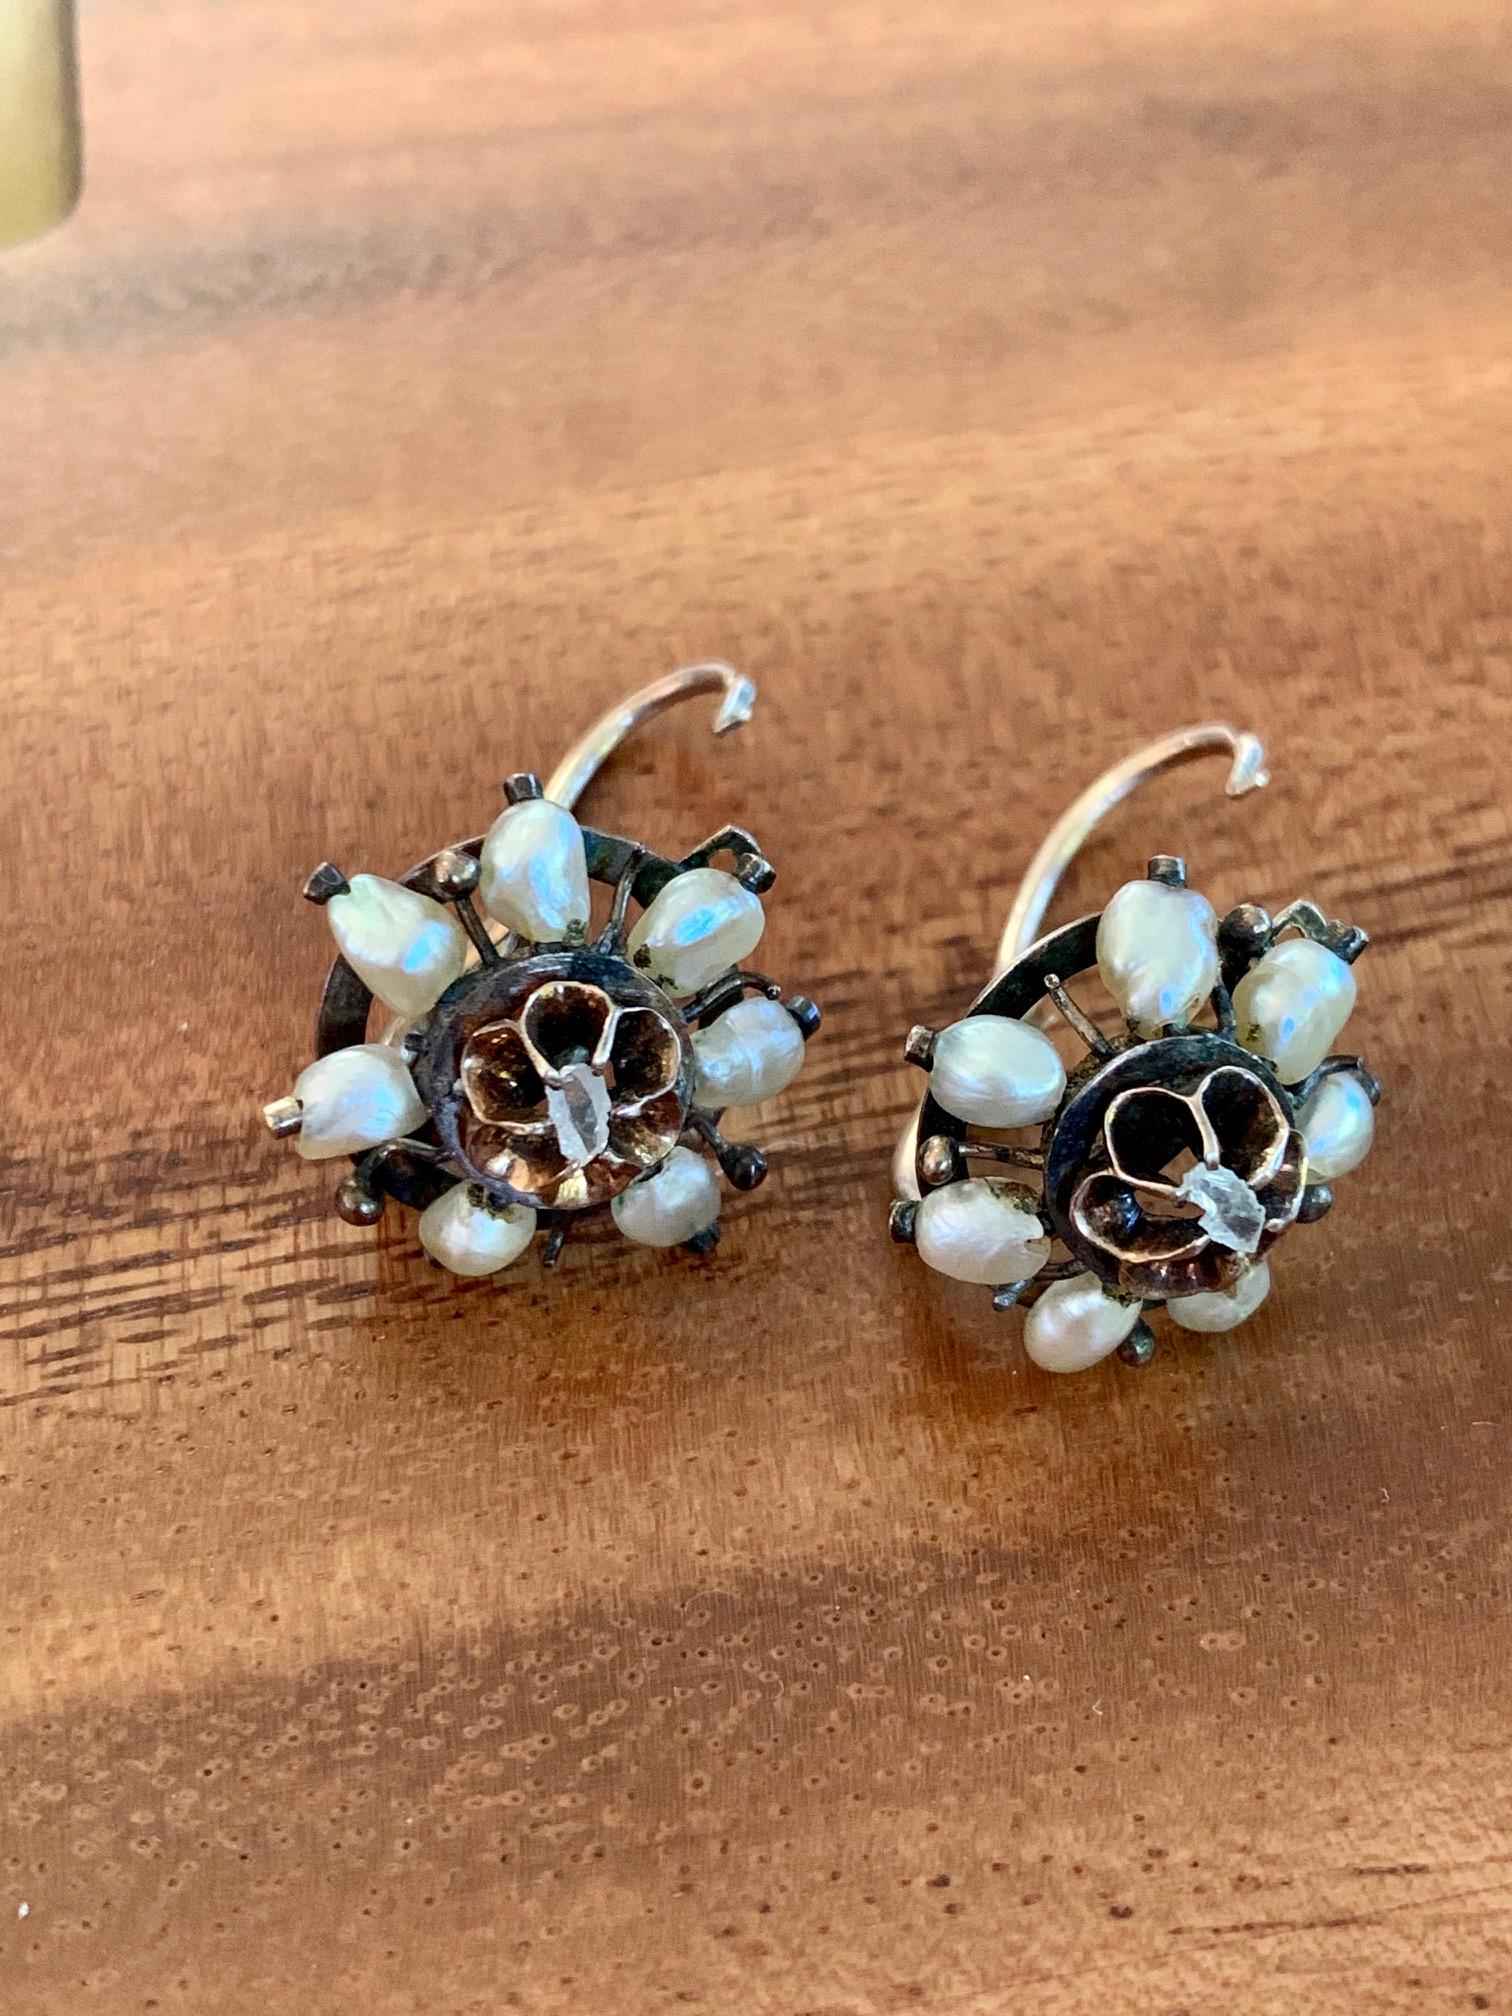 These antique Pearl and Rose Cut Diamond earrings are from the late 1800's, approximately 1880-1900.   Each earring has seven pearls surrounding the rose cut Diamond center stone. 

Closure: Front Hook 
Weight: 5.8 grams